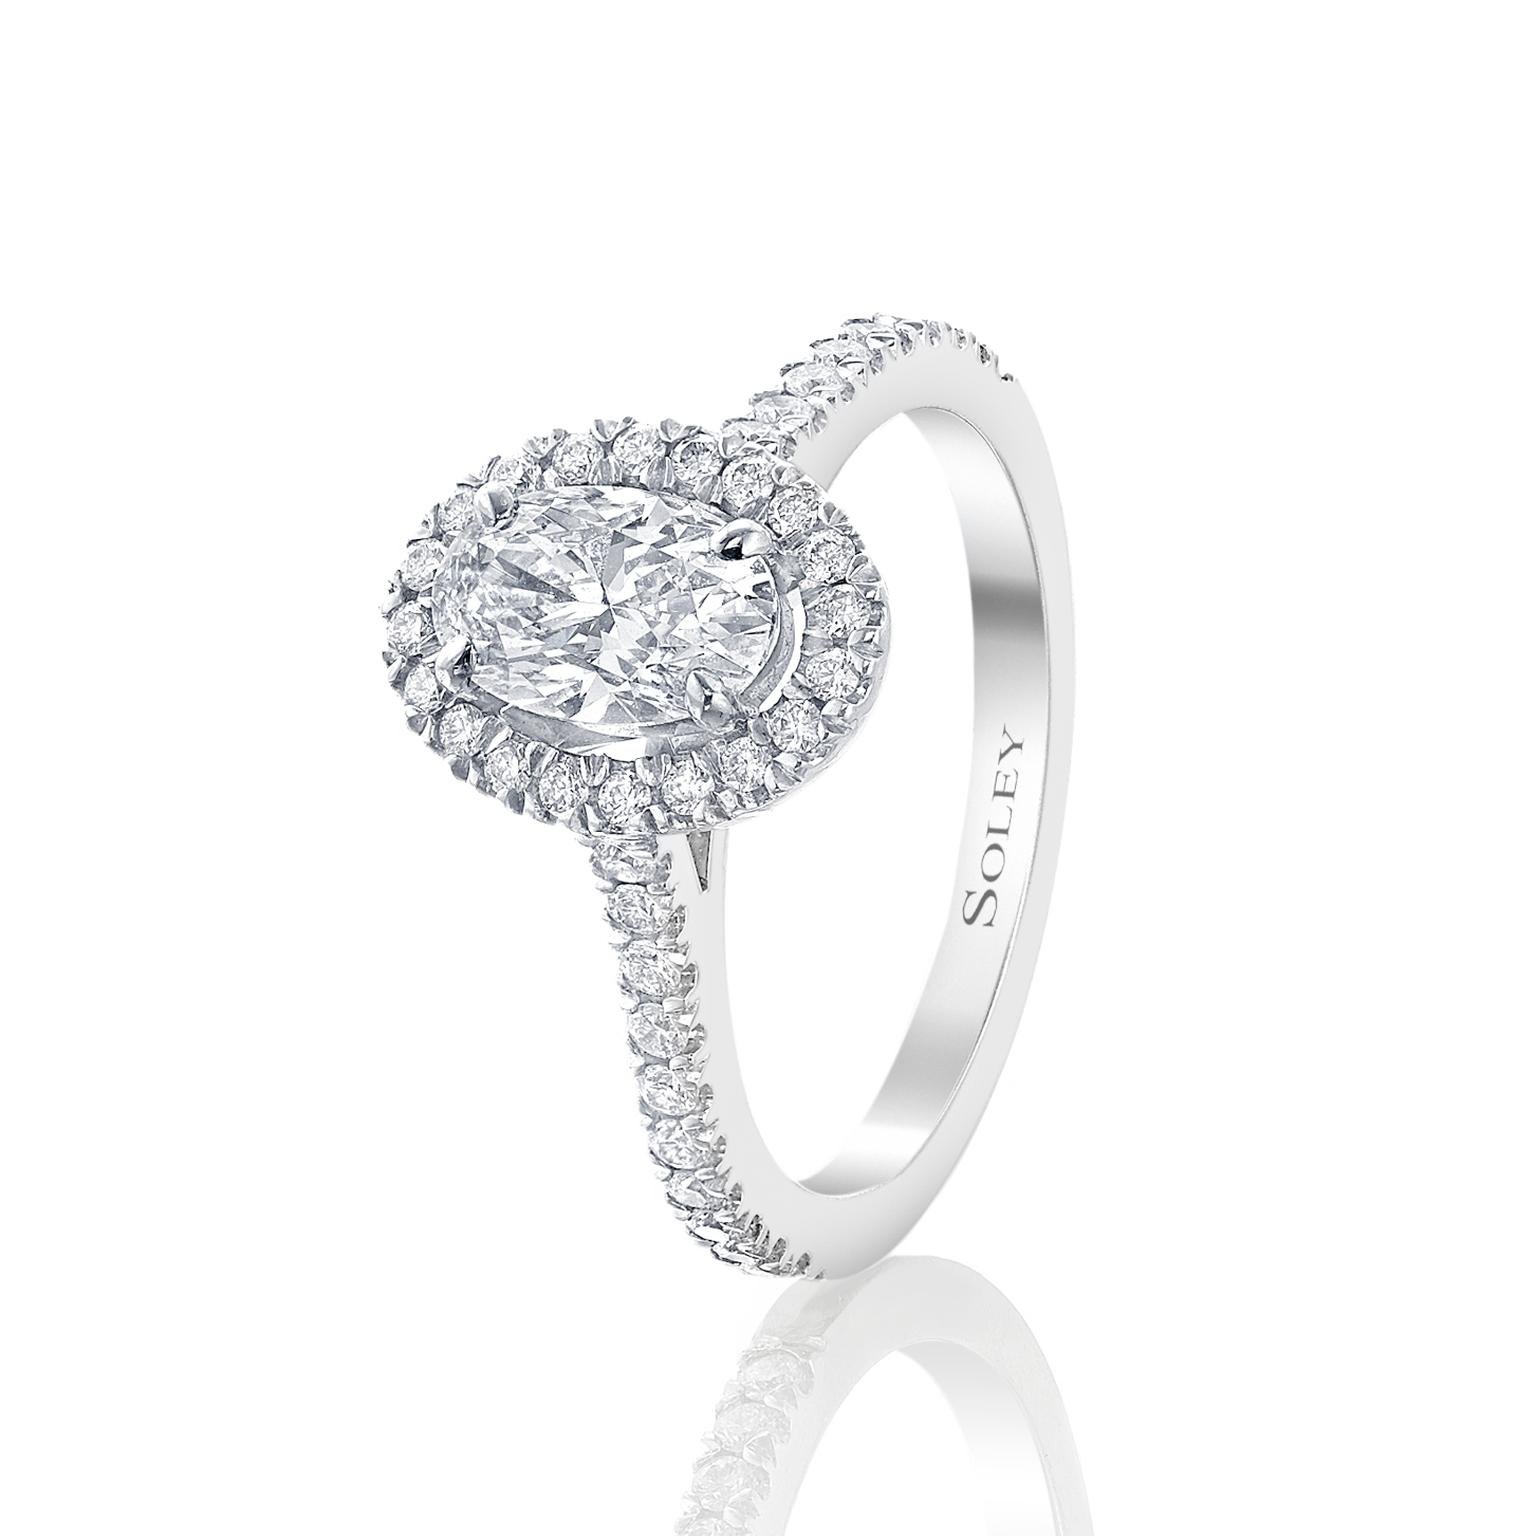 Soley London oval cut diamond engagement ring